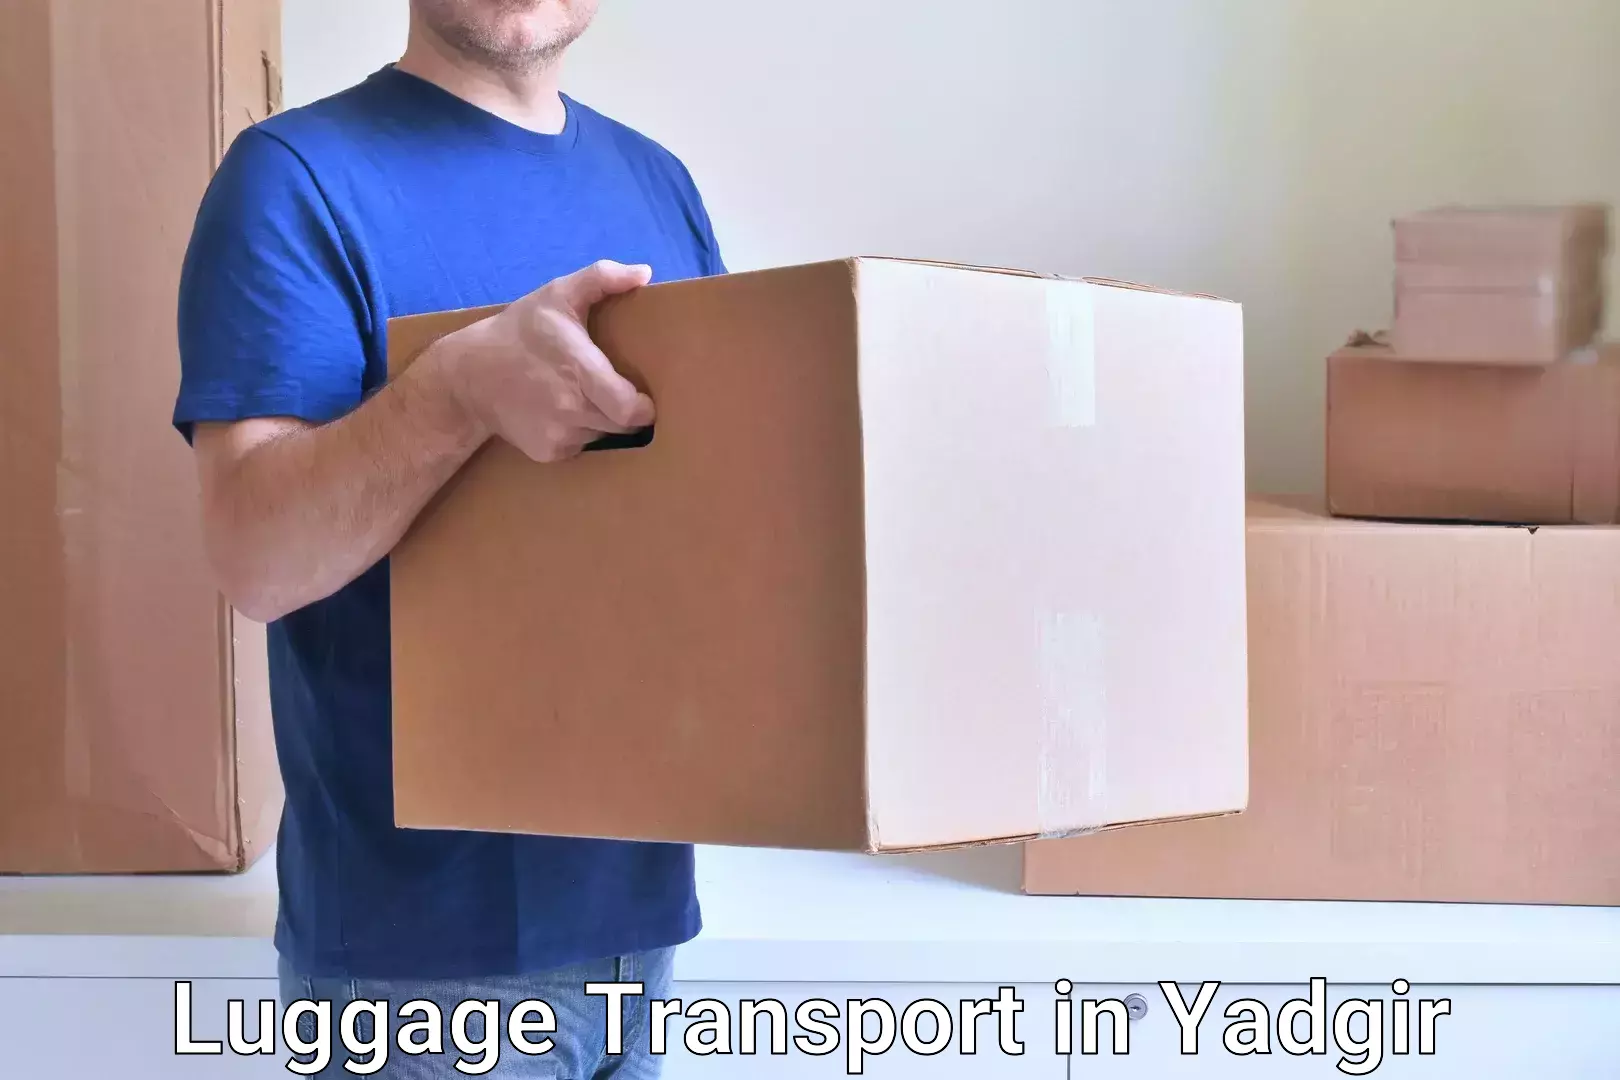 Baggage delivery support in Yadgir